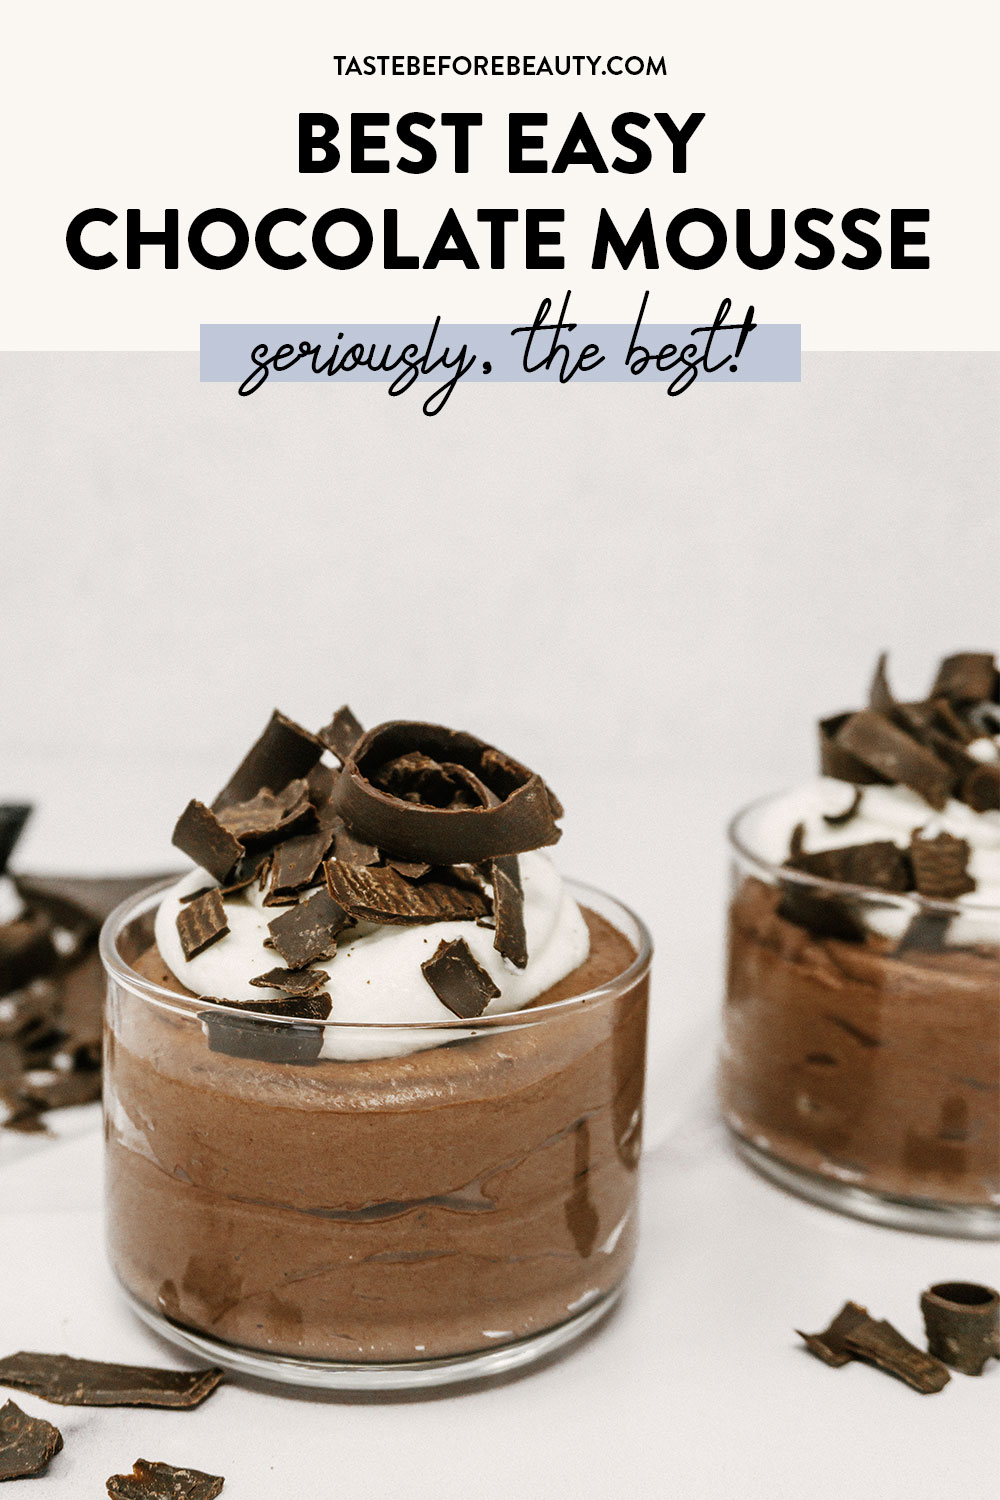 taste before beauty best easy chocolate mousse in glass cups pinterest pin